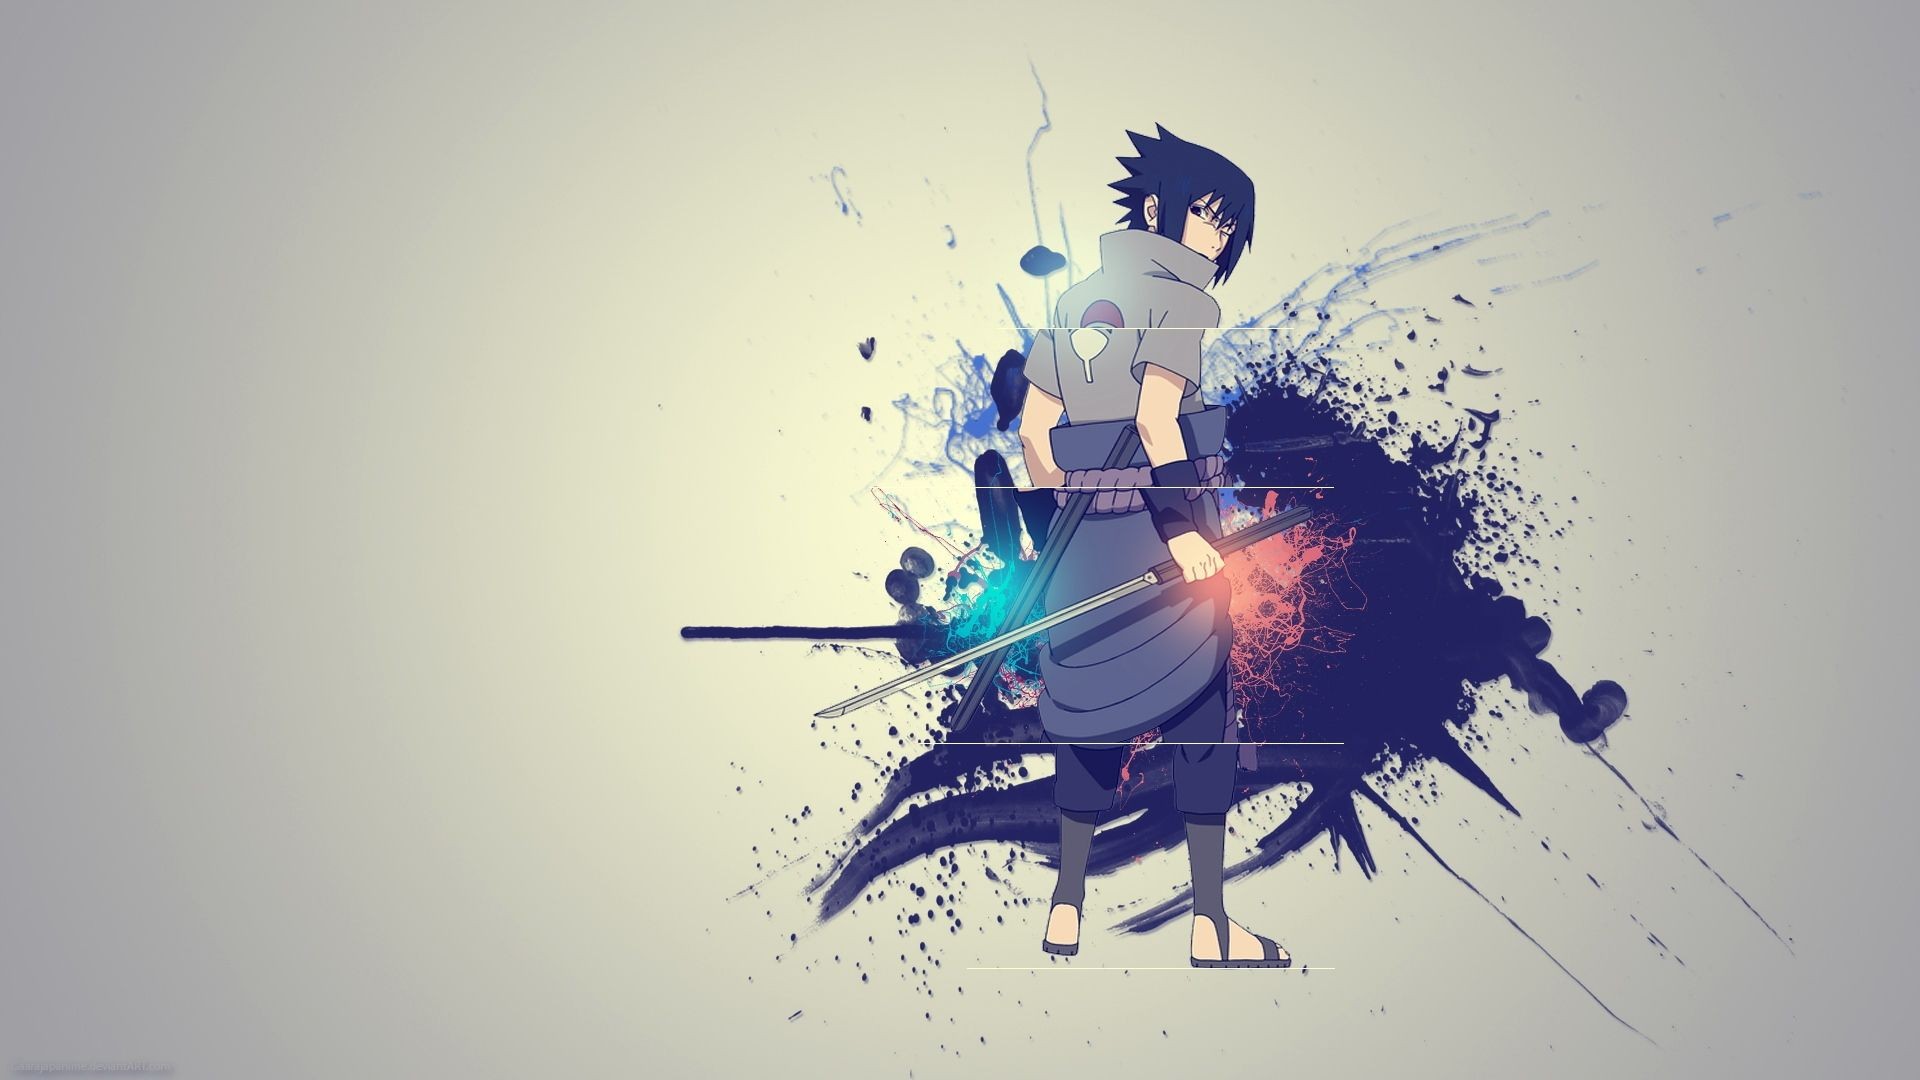 hd wallpaper for mobile 1920x1080 download,graphic design,illustration,cartoon,anime,graphics